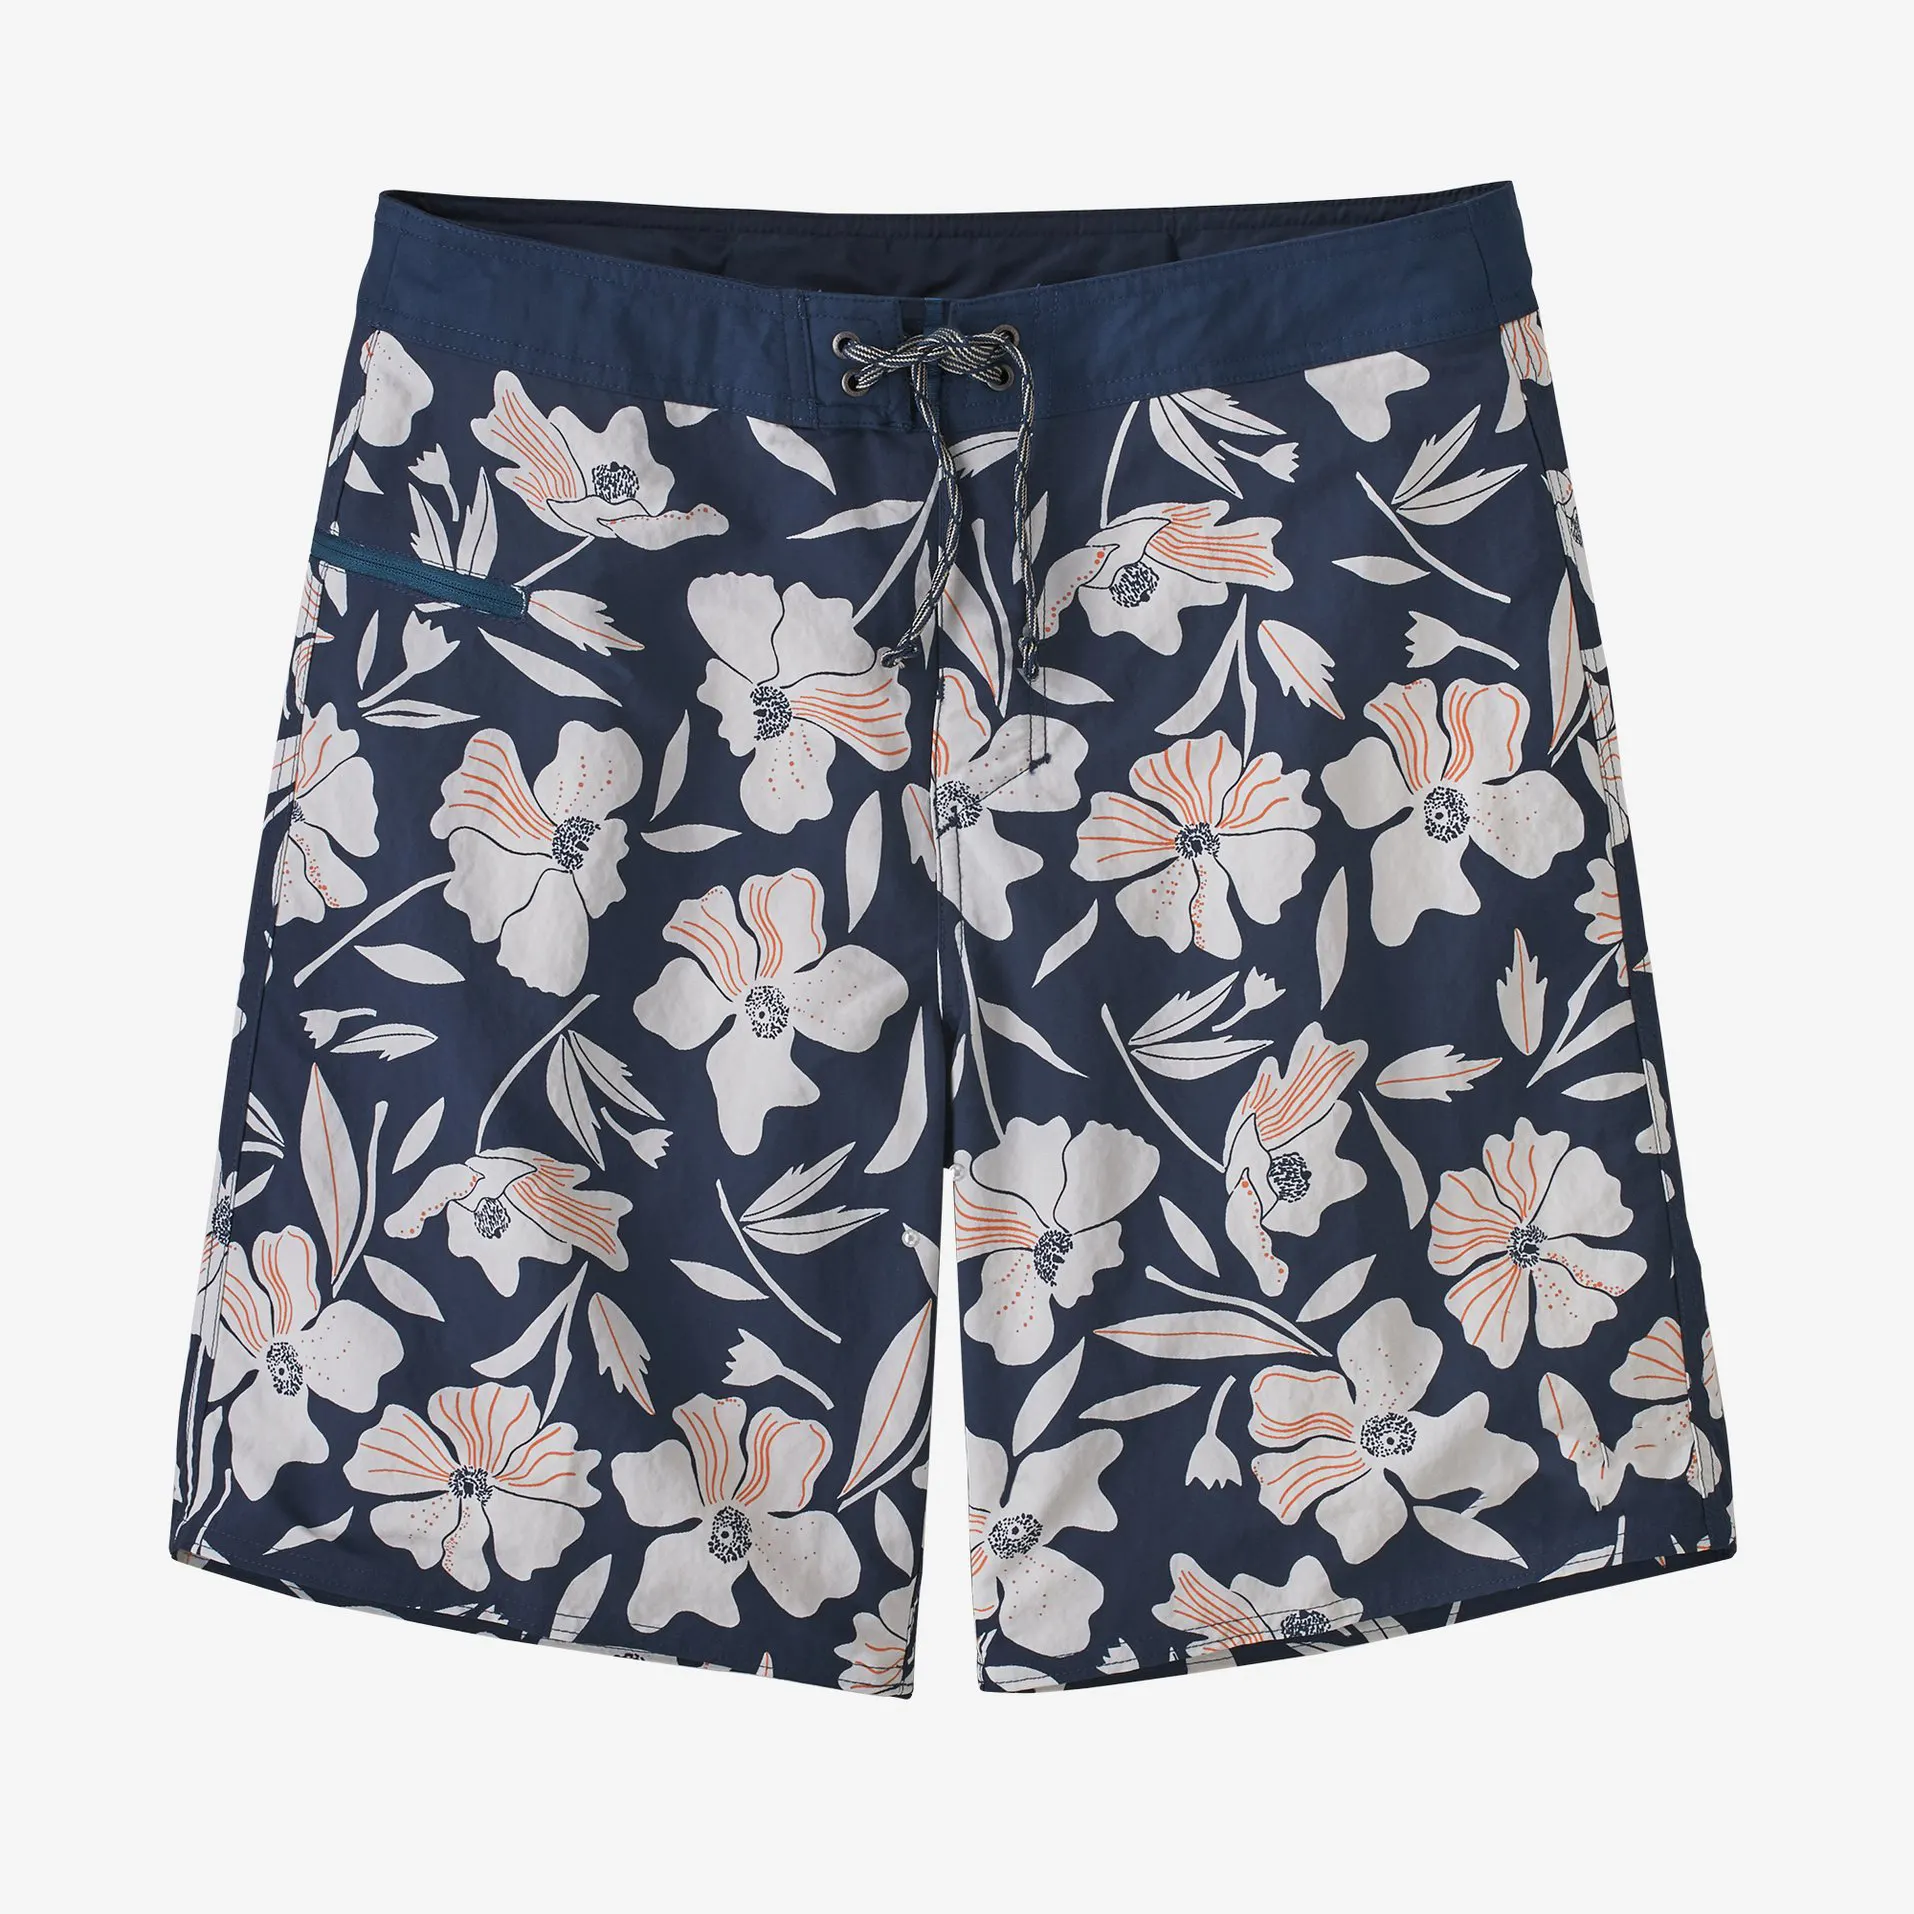 Fashion Design Factory Price Sublimation Flower Pattern Men's Board Short Lined with Inside Brief For Swimming, Surf Beach Short